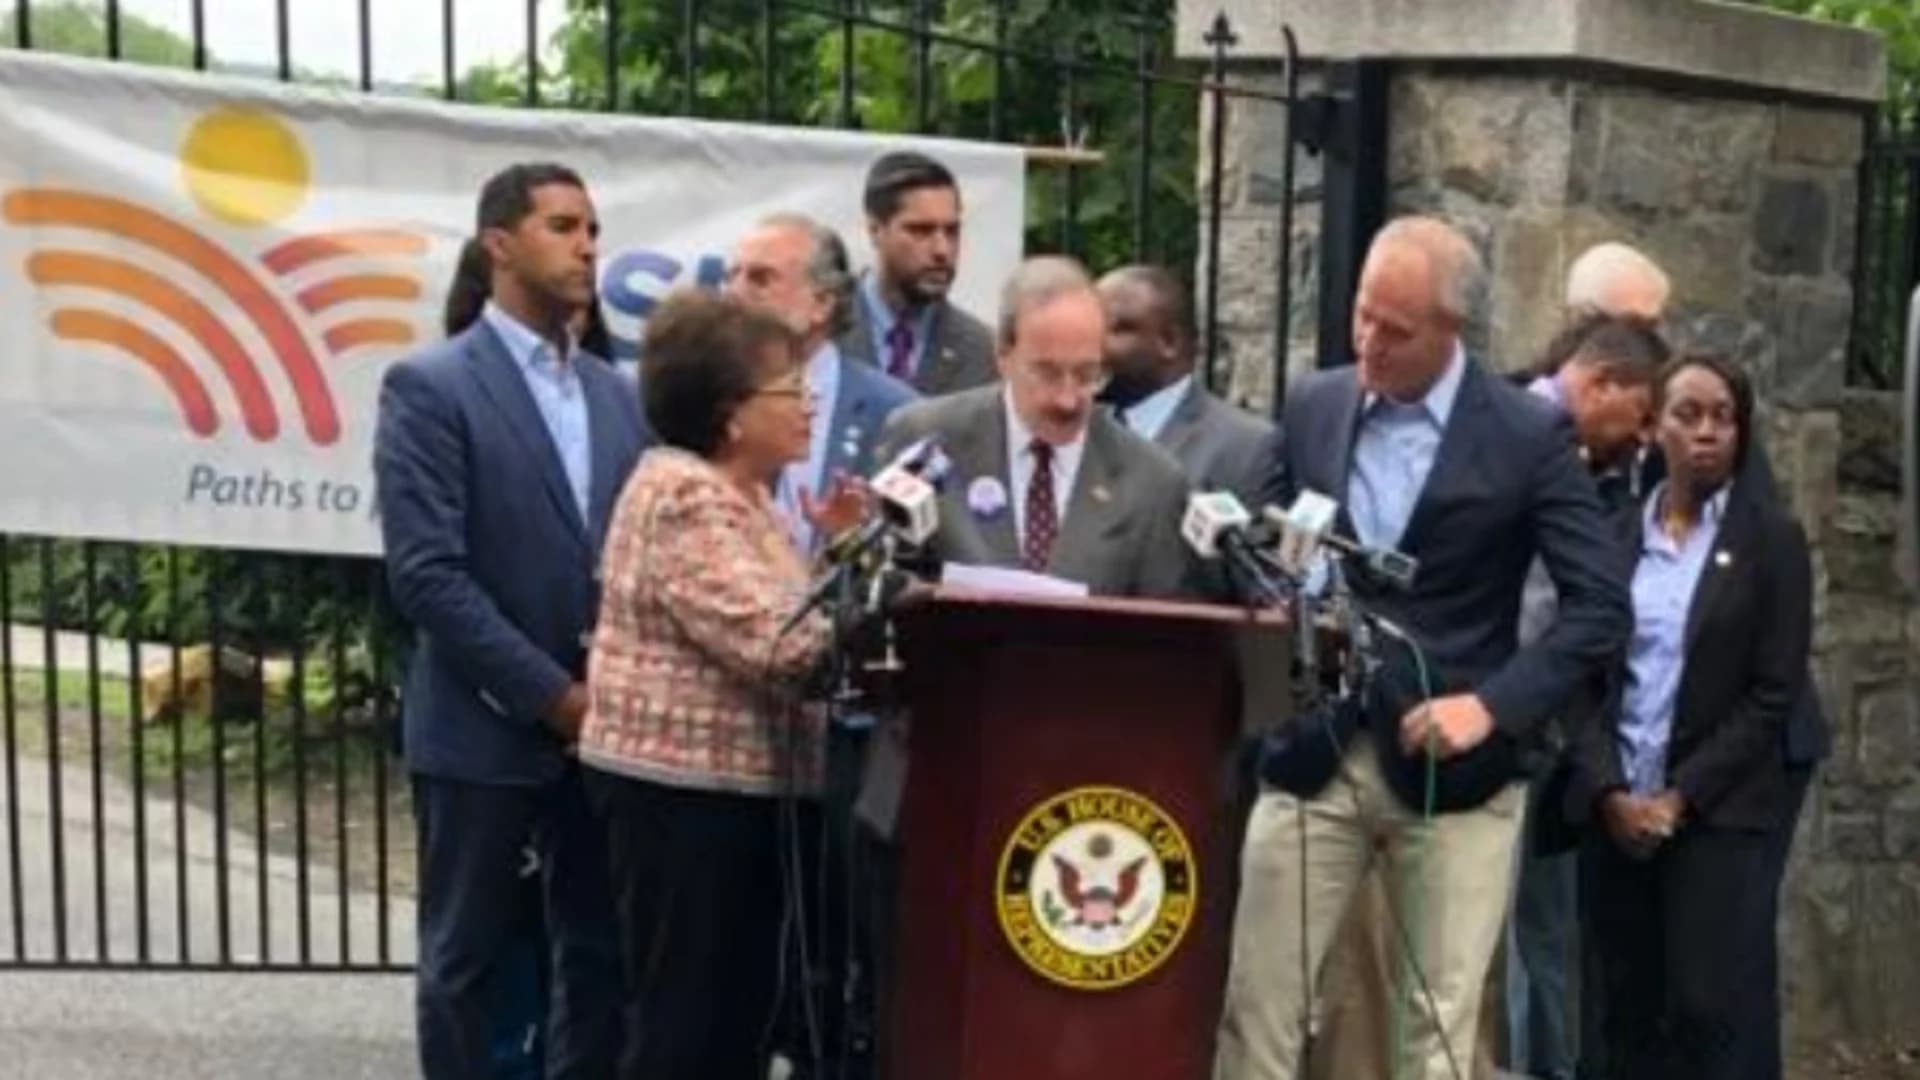 Westchester politicians denied access to facility housing immigrant children